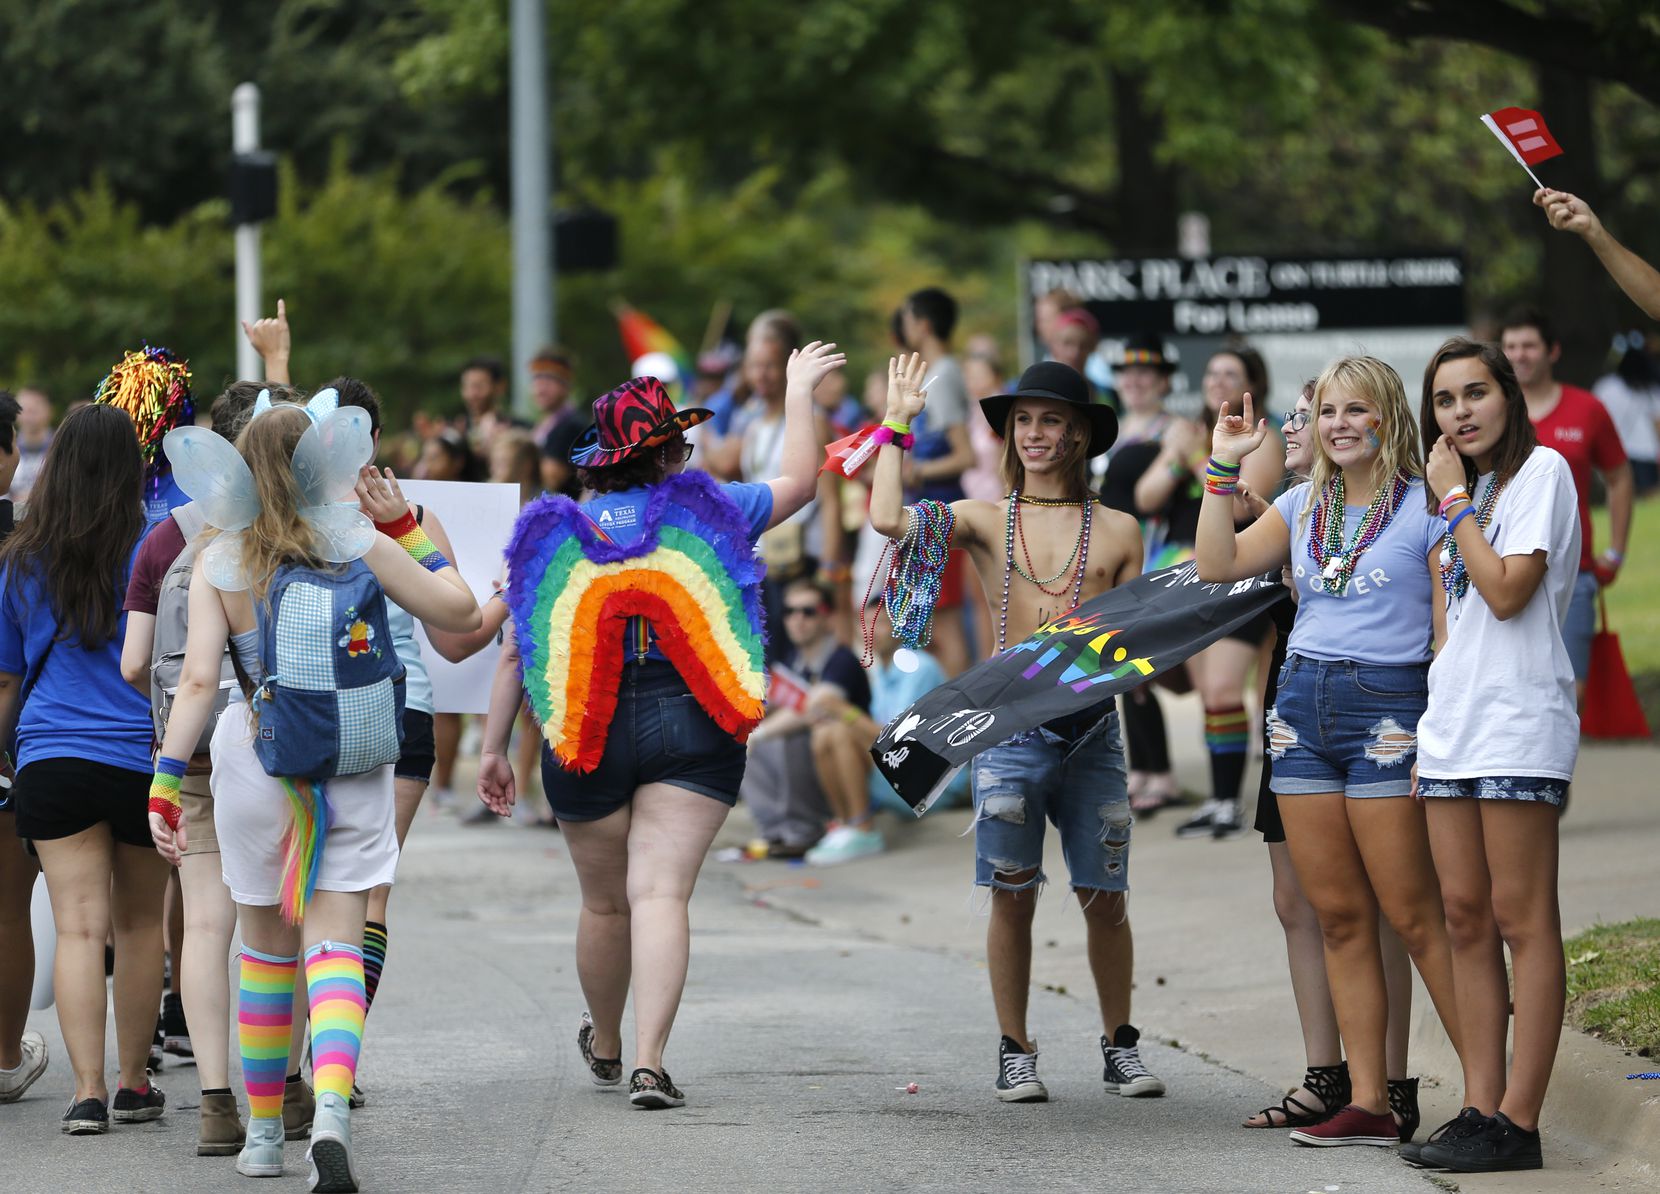 At Dallas’ gay pride parade, thousands turn out to celebrate ‘a good year’